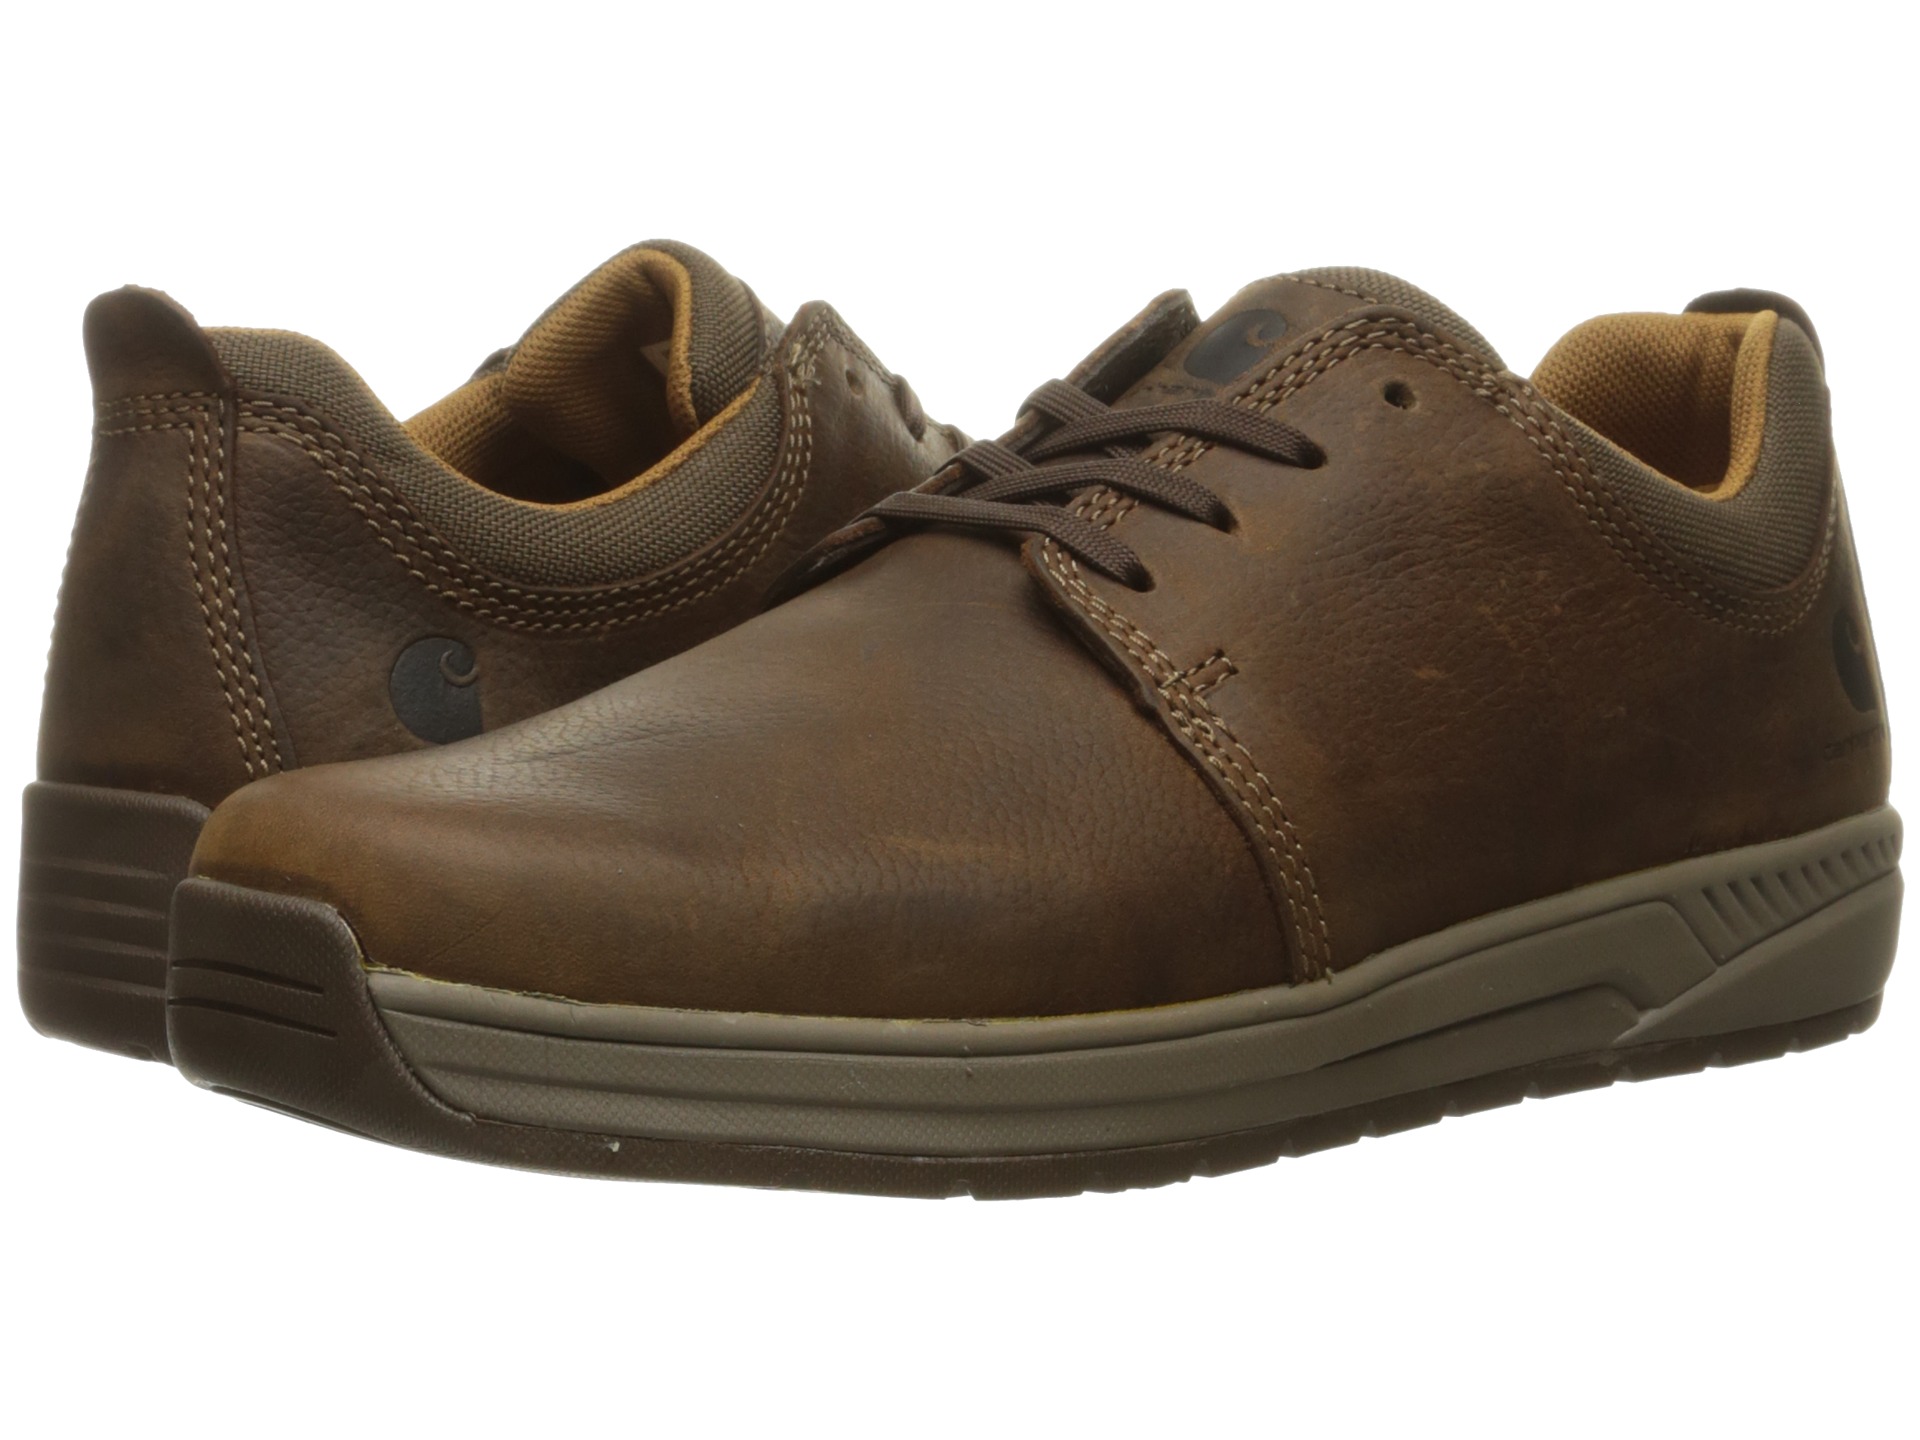 Carhartt Oxford Shoe Brown Oil Tanned Leather - Zappos.com Free ...